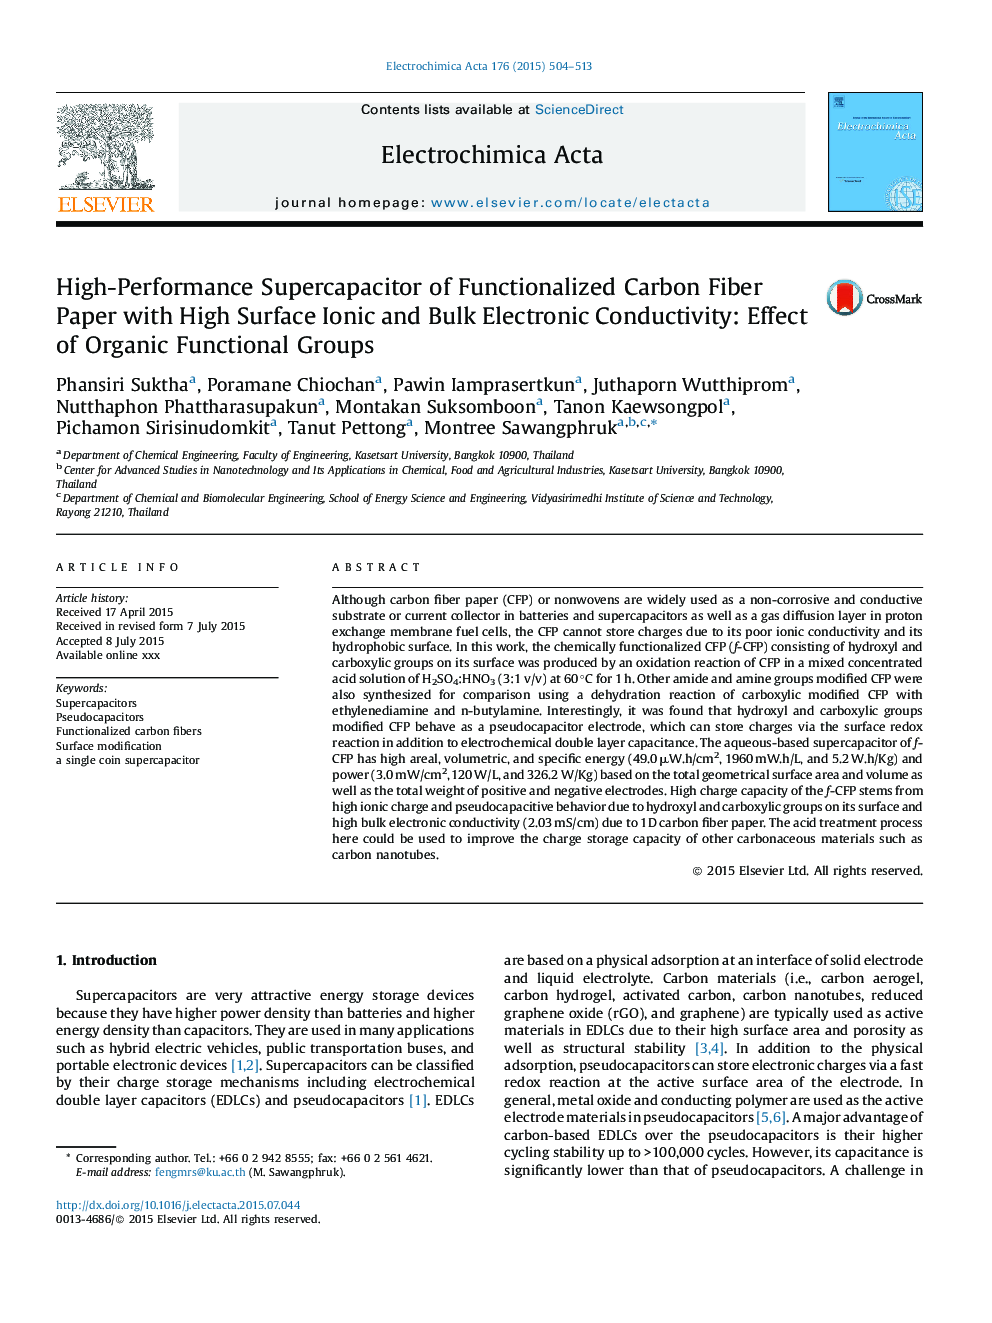 High-Performance Supercapacitor of Functionalized Carbon Fiber Paper with High Surface Ionic and Bulk Electronic Conductivity: Effect of Organic Functional Groups